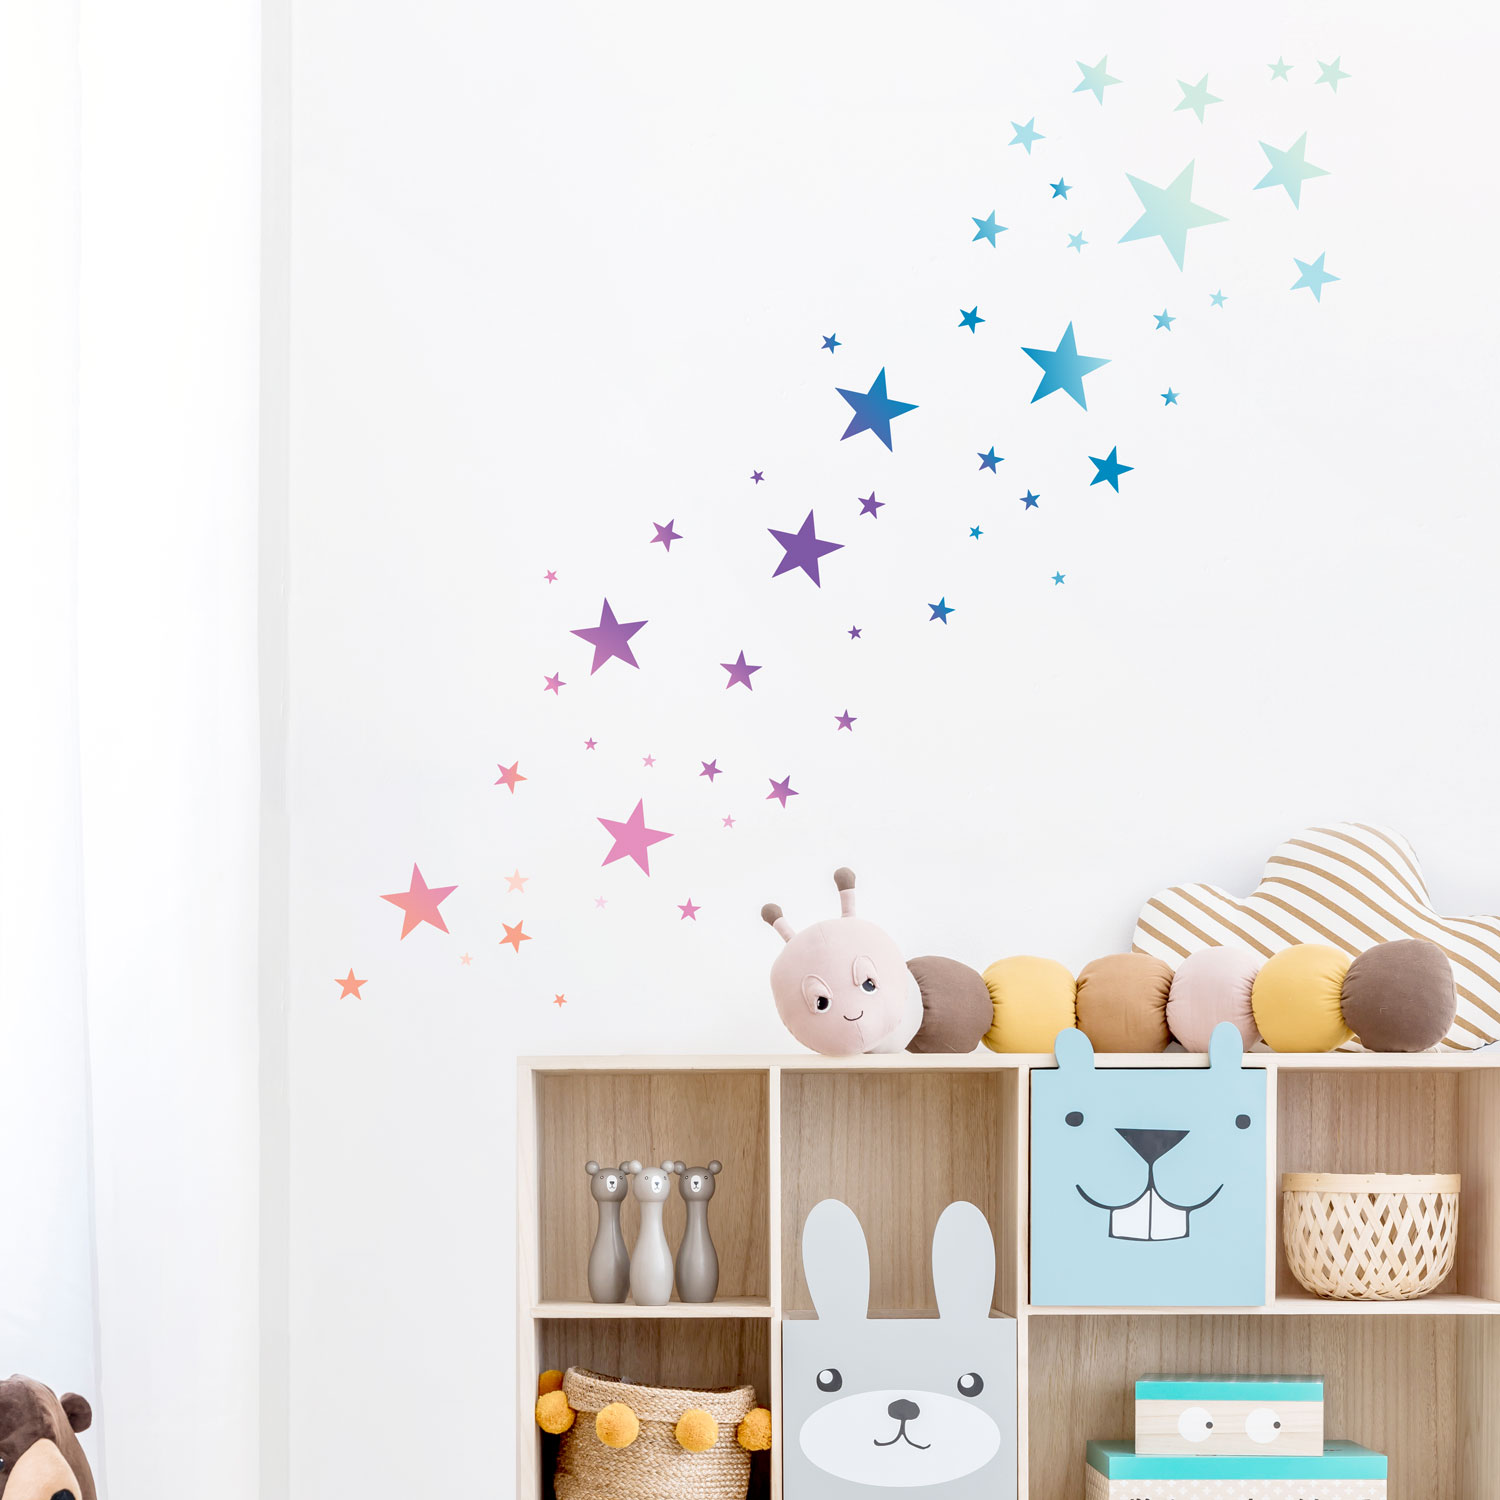 Removable Peel & Stick Wallums | Wall Decal Stars Ombre